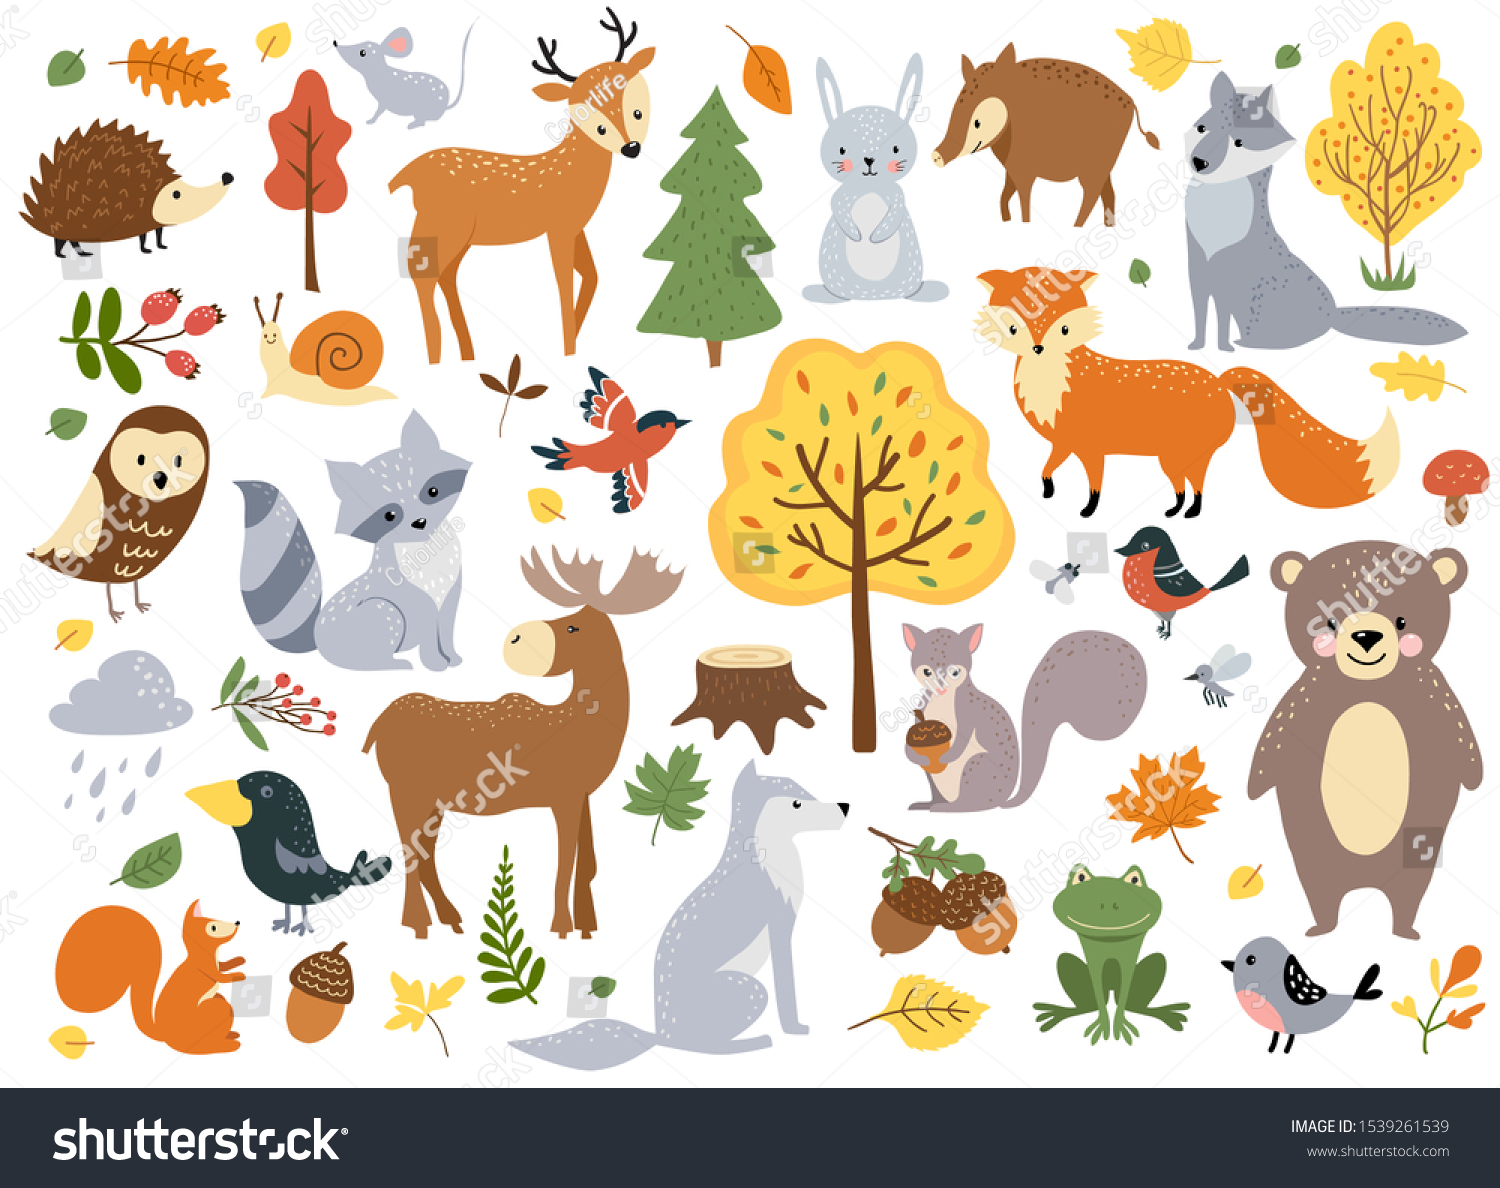 2,879,705 Animals in the forest Images, Stock Photos & Vectors ...